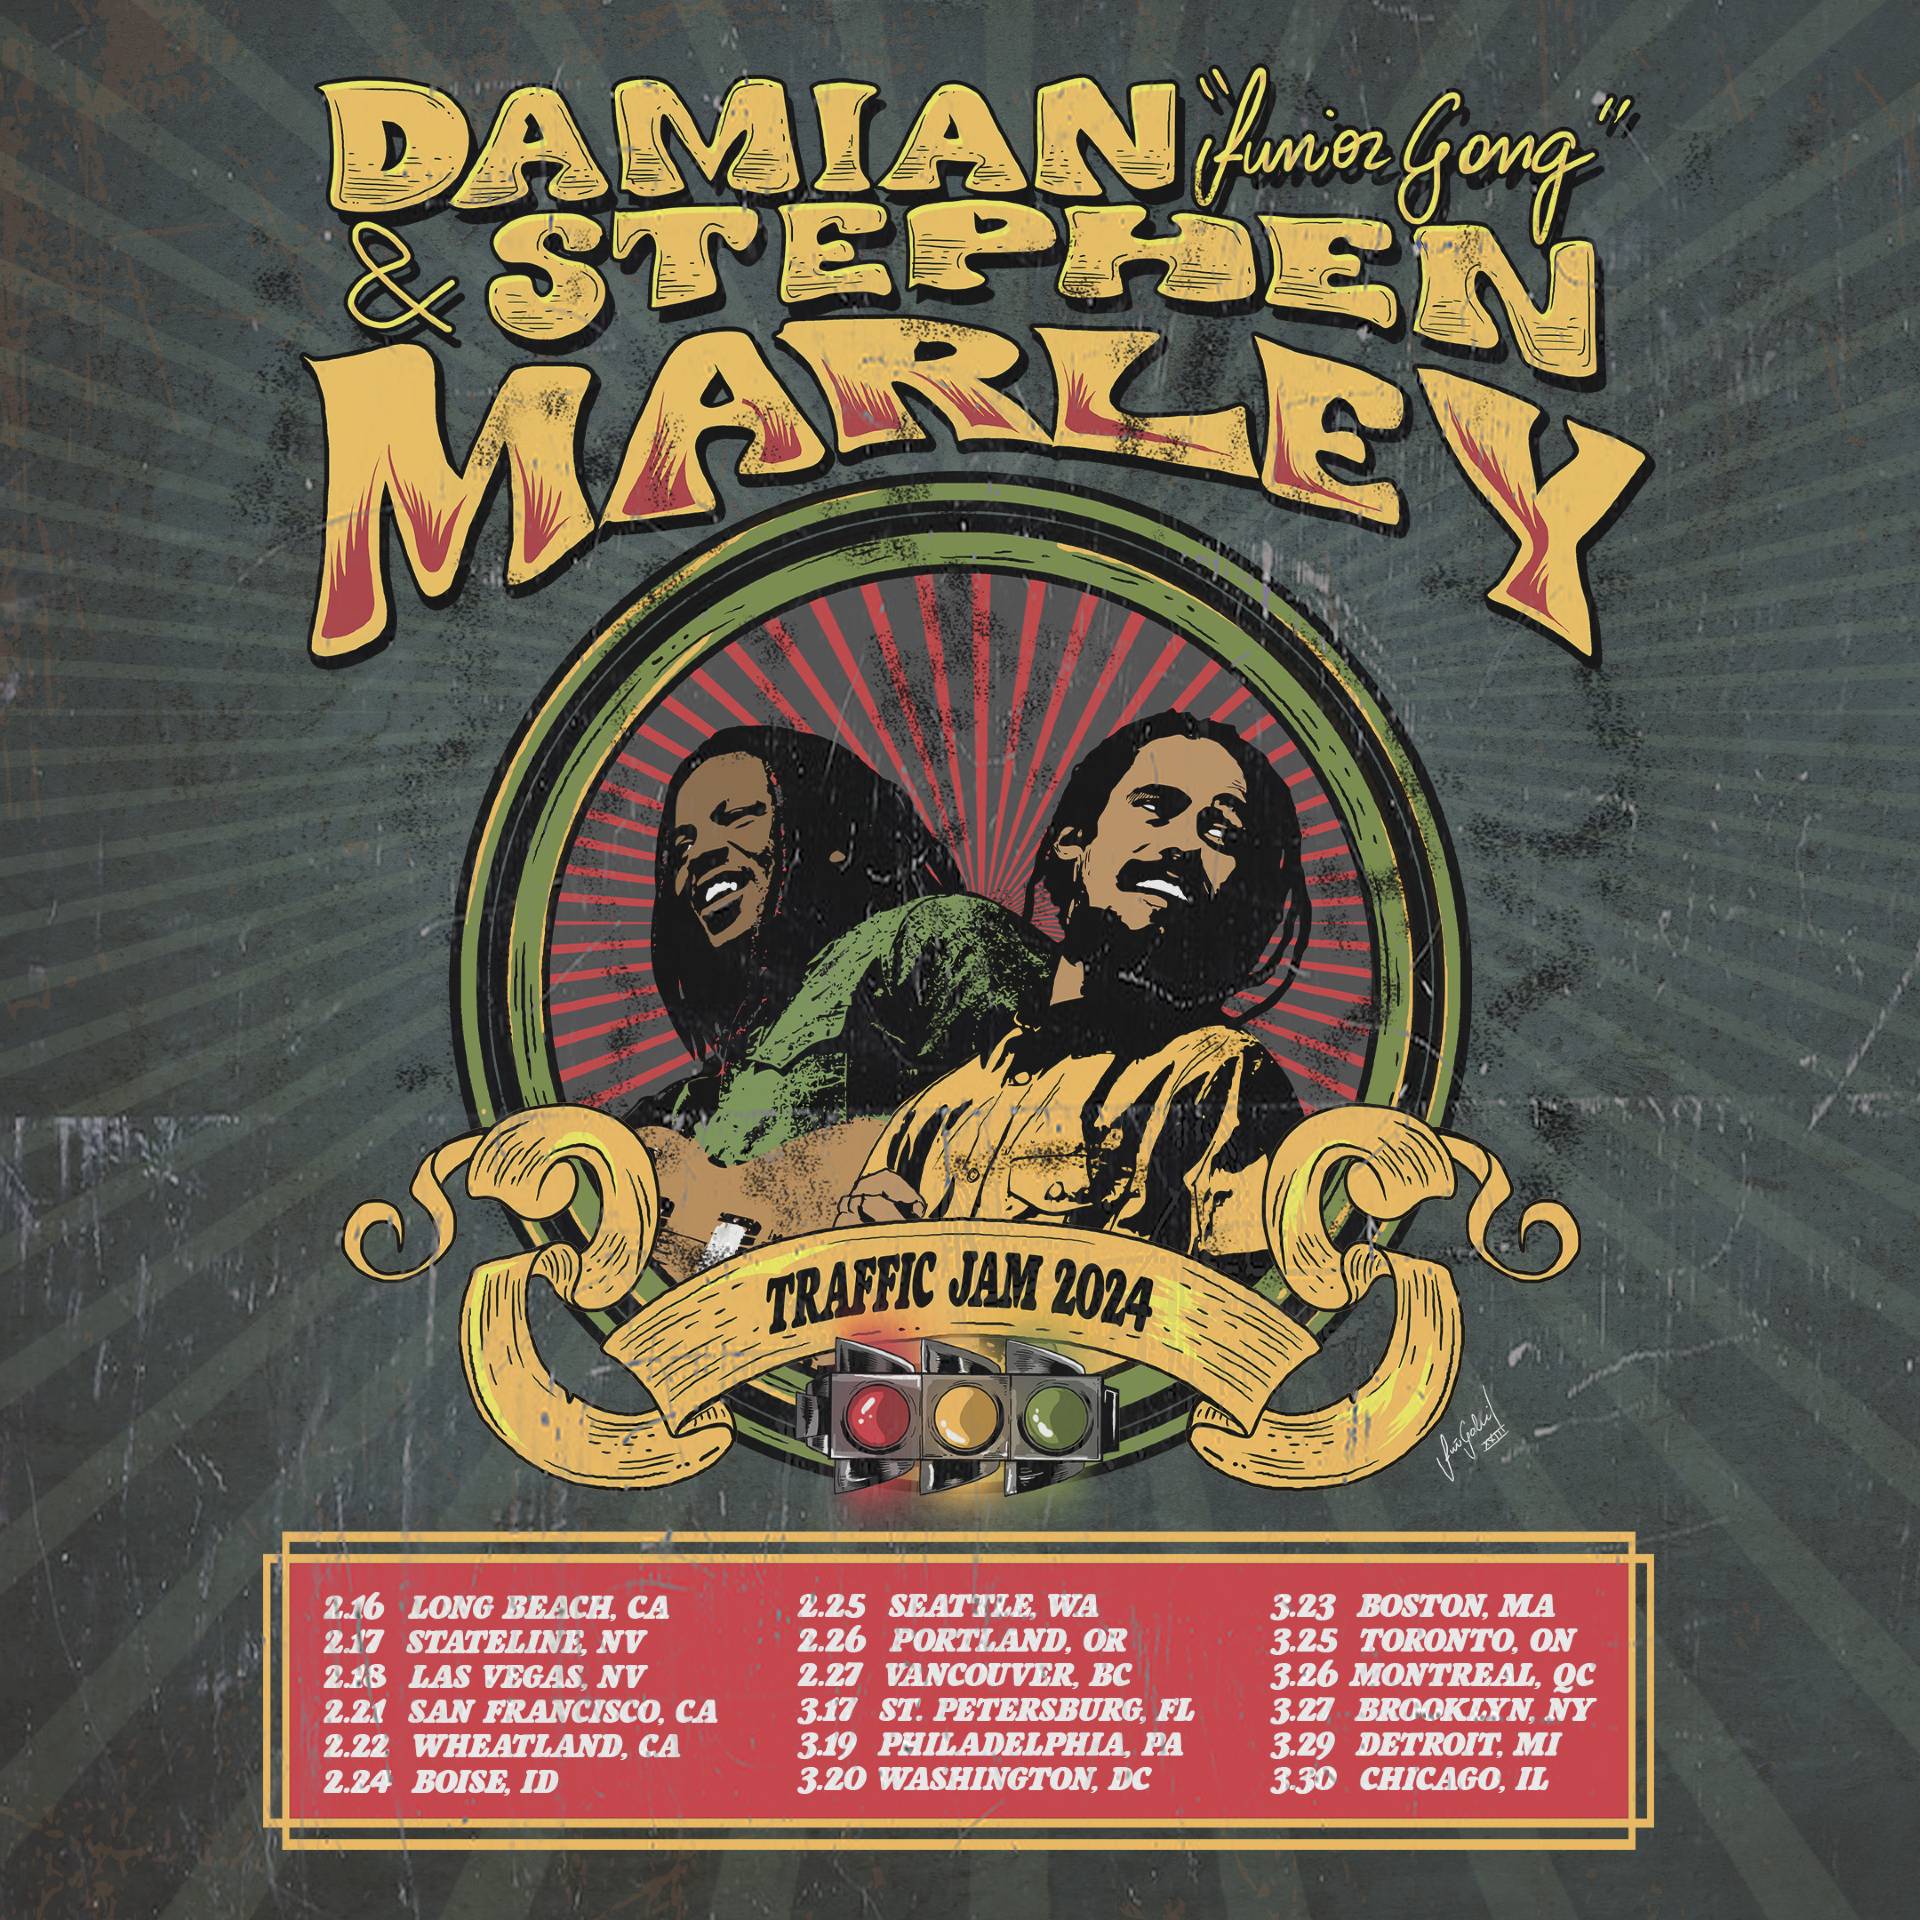 Damian and Stephen Marley 2024 tour flyer